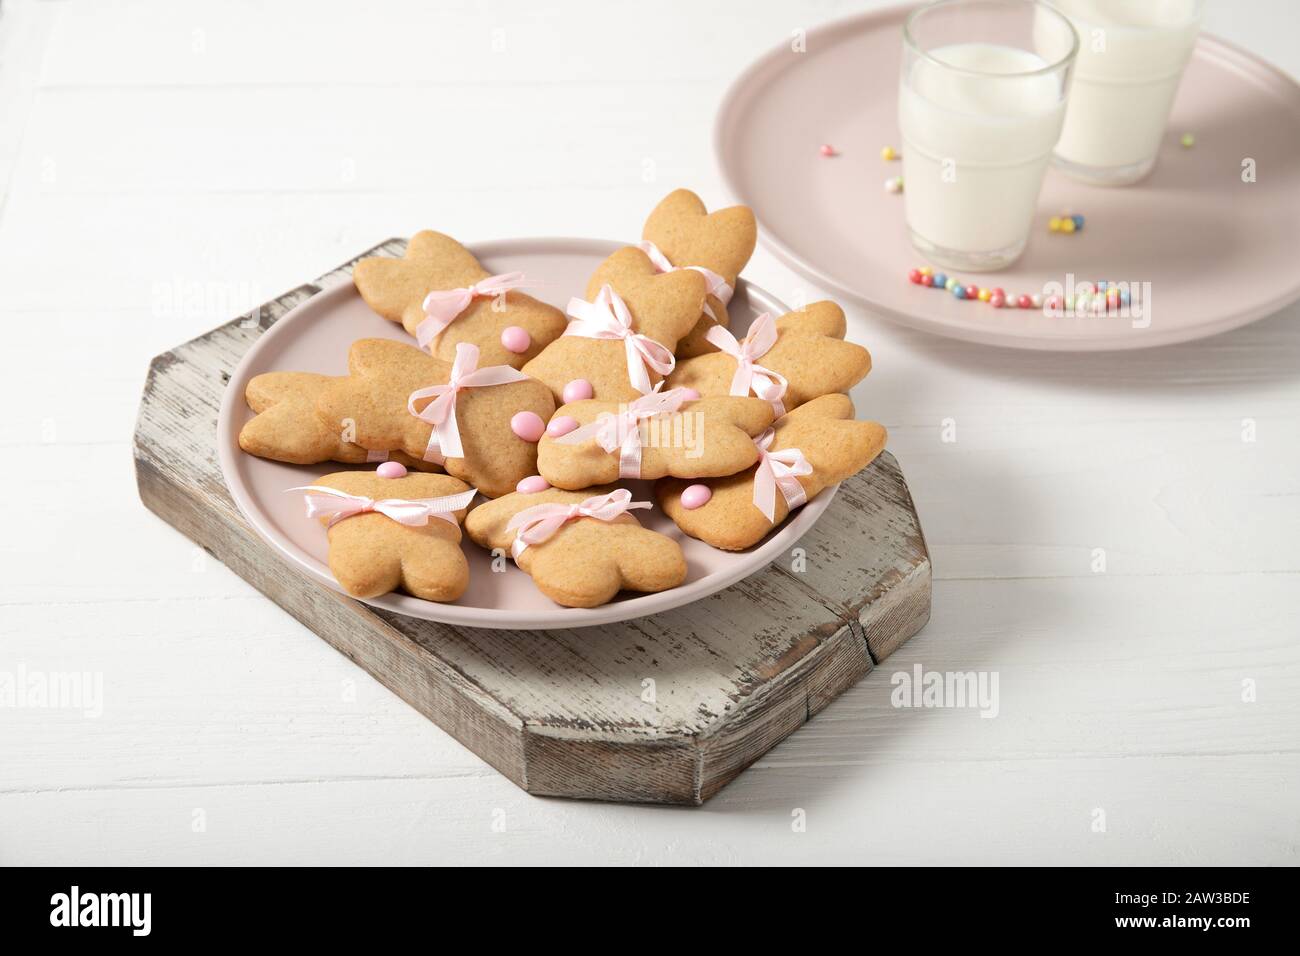 Easter cookies on a plate with a glass of milk on a wooden background. Easter bunnies. Stock Photo